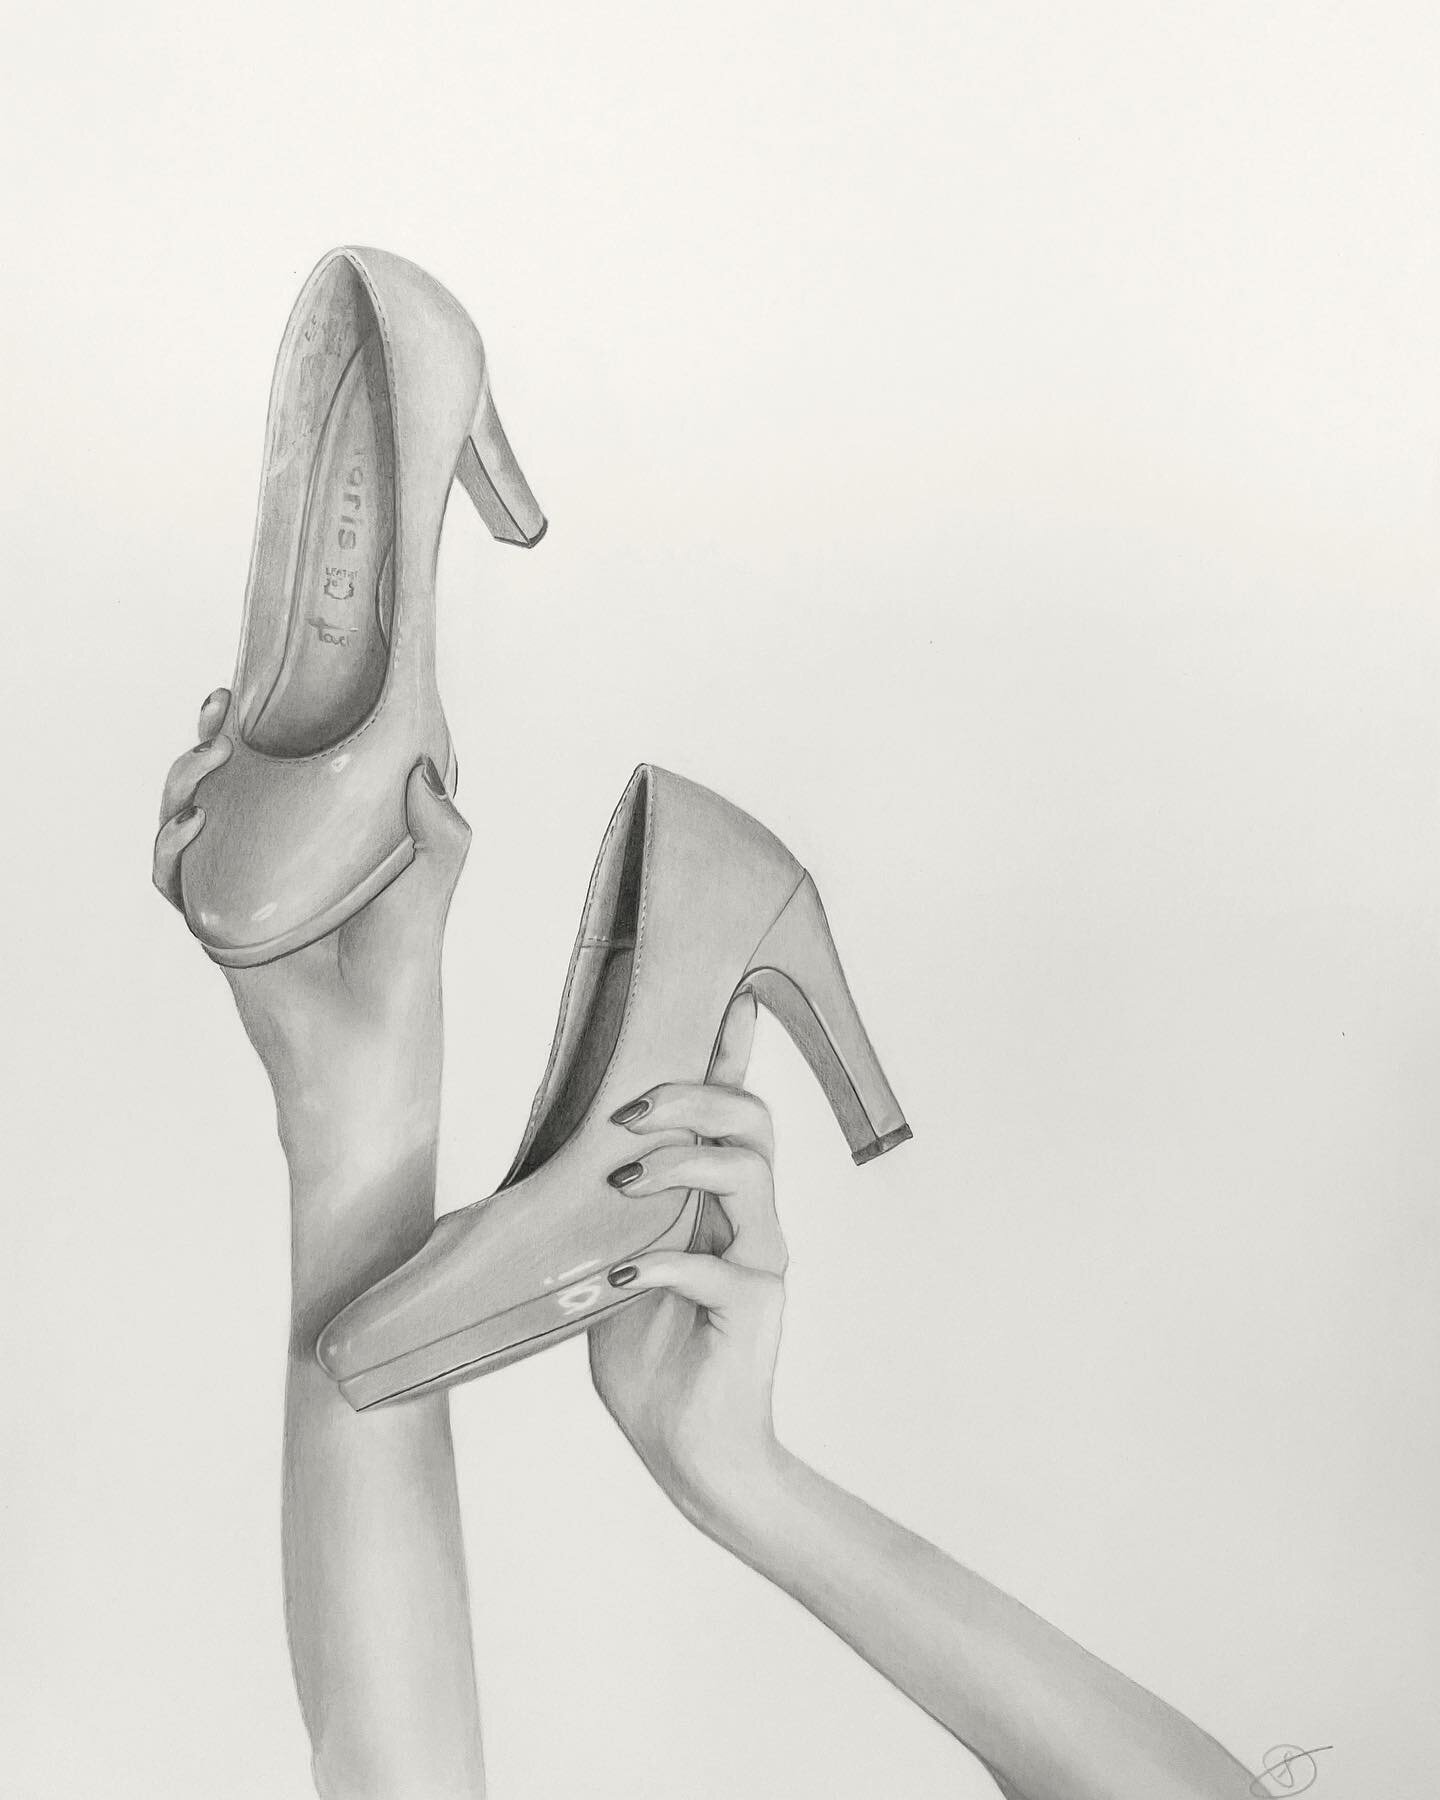 She&rsquo;s finished! 
&ldquo;These shoes weren&rsquo;t made for walkin&rsquo;&rdquo;

Who else ends up carrying their shoes by the end of the night? 🙋&zwj;♀️👠

Drawn with @staedtler pencils on A3 @magnani1404official cold pressed paper 🤍

#shoes 